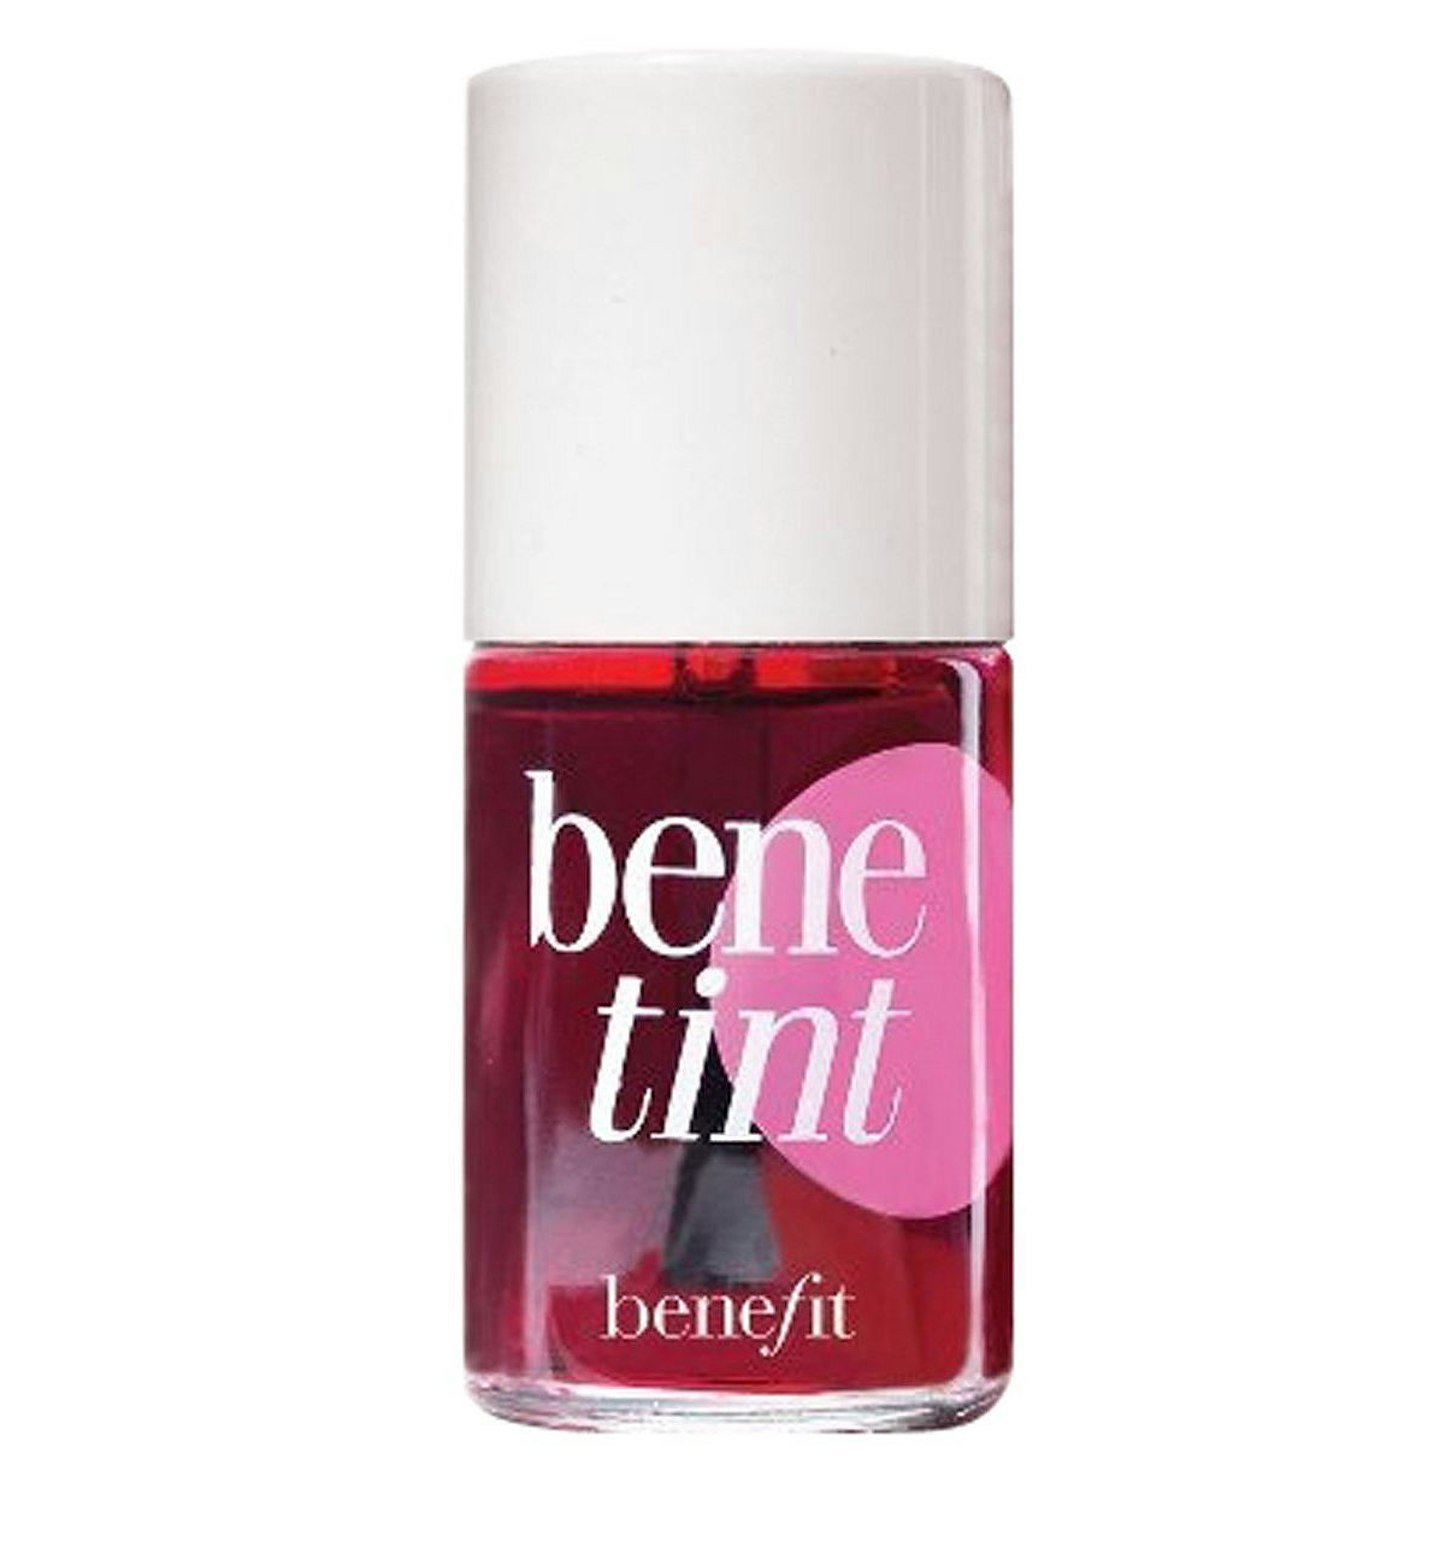 Benefit Benetint - Rose-Tinted Lip And Cheek Stain, £25.50 from Boots